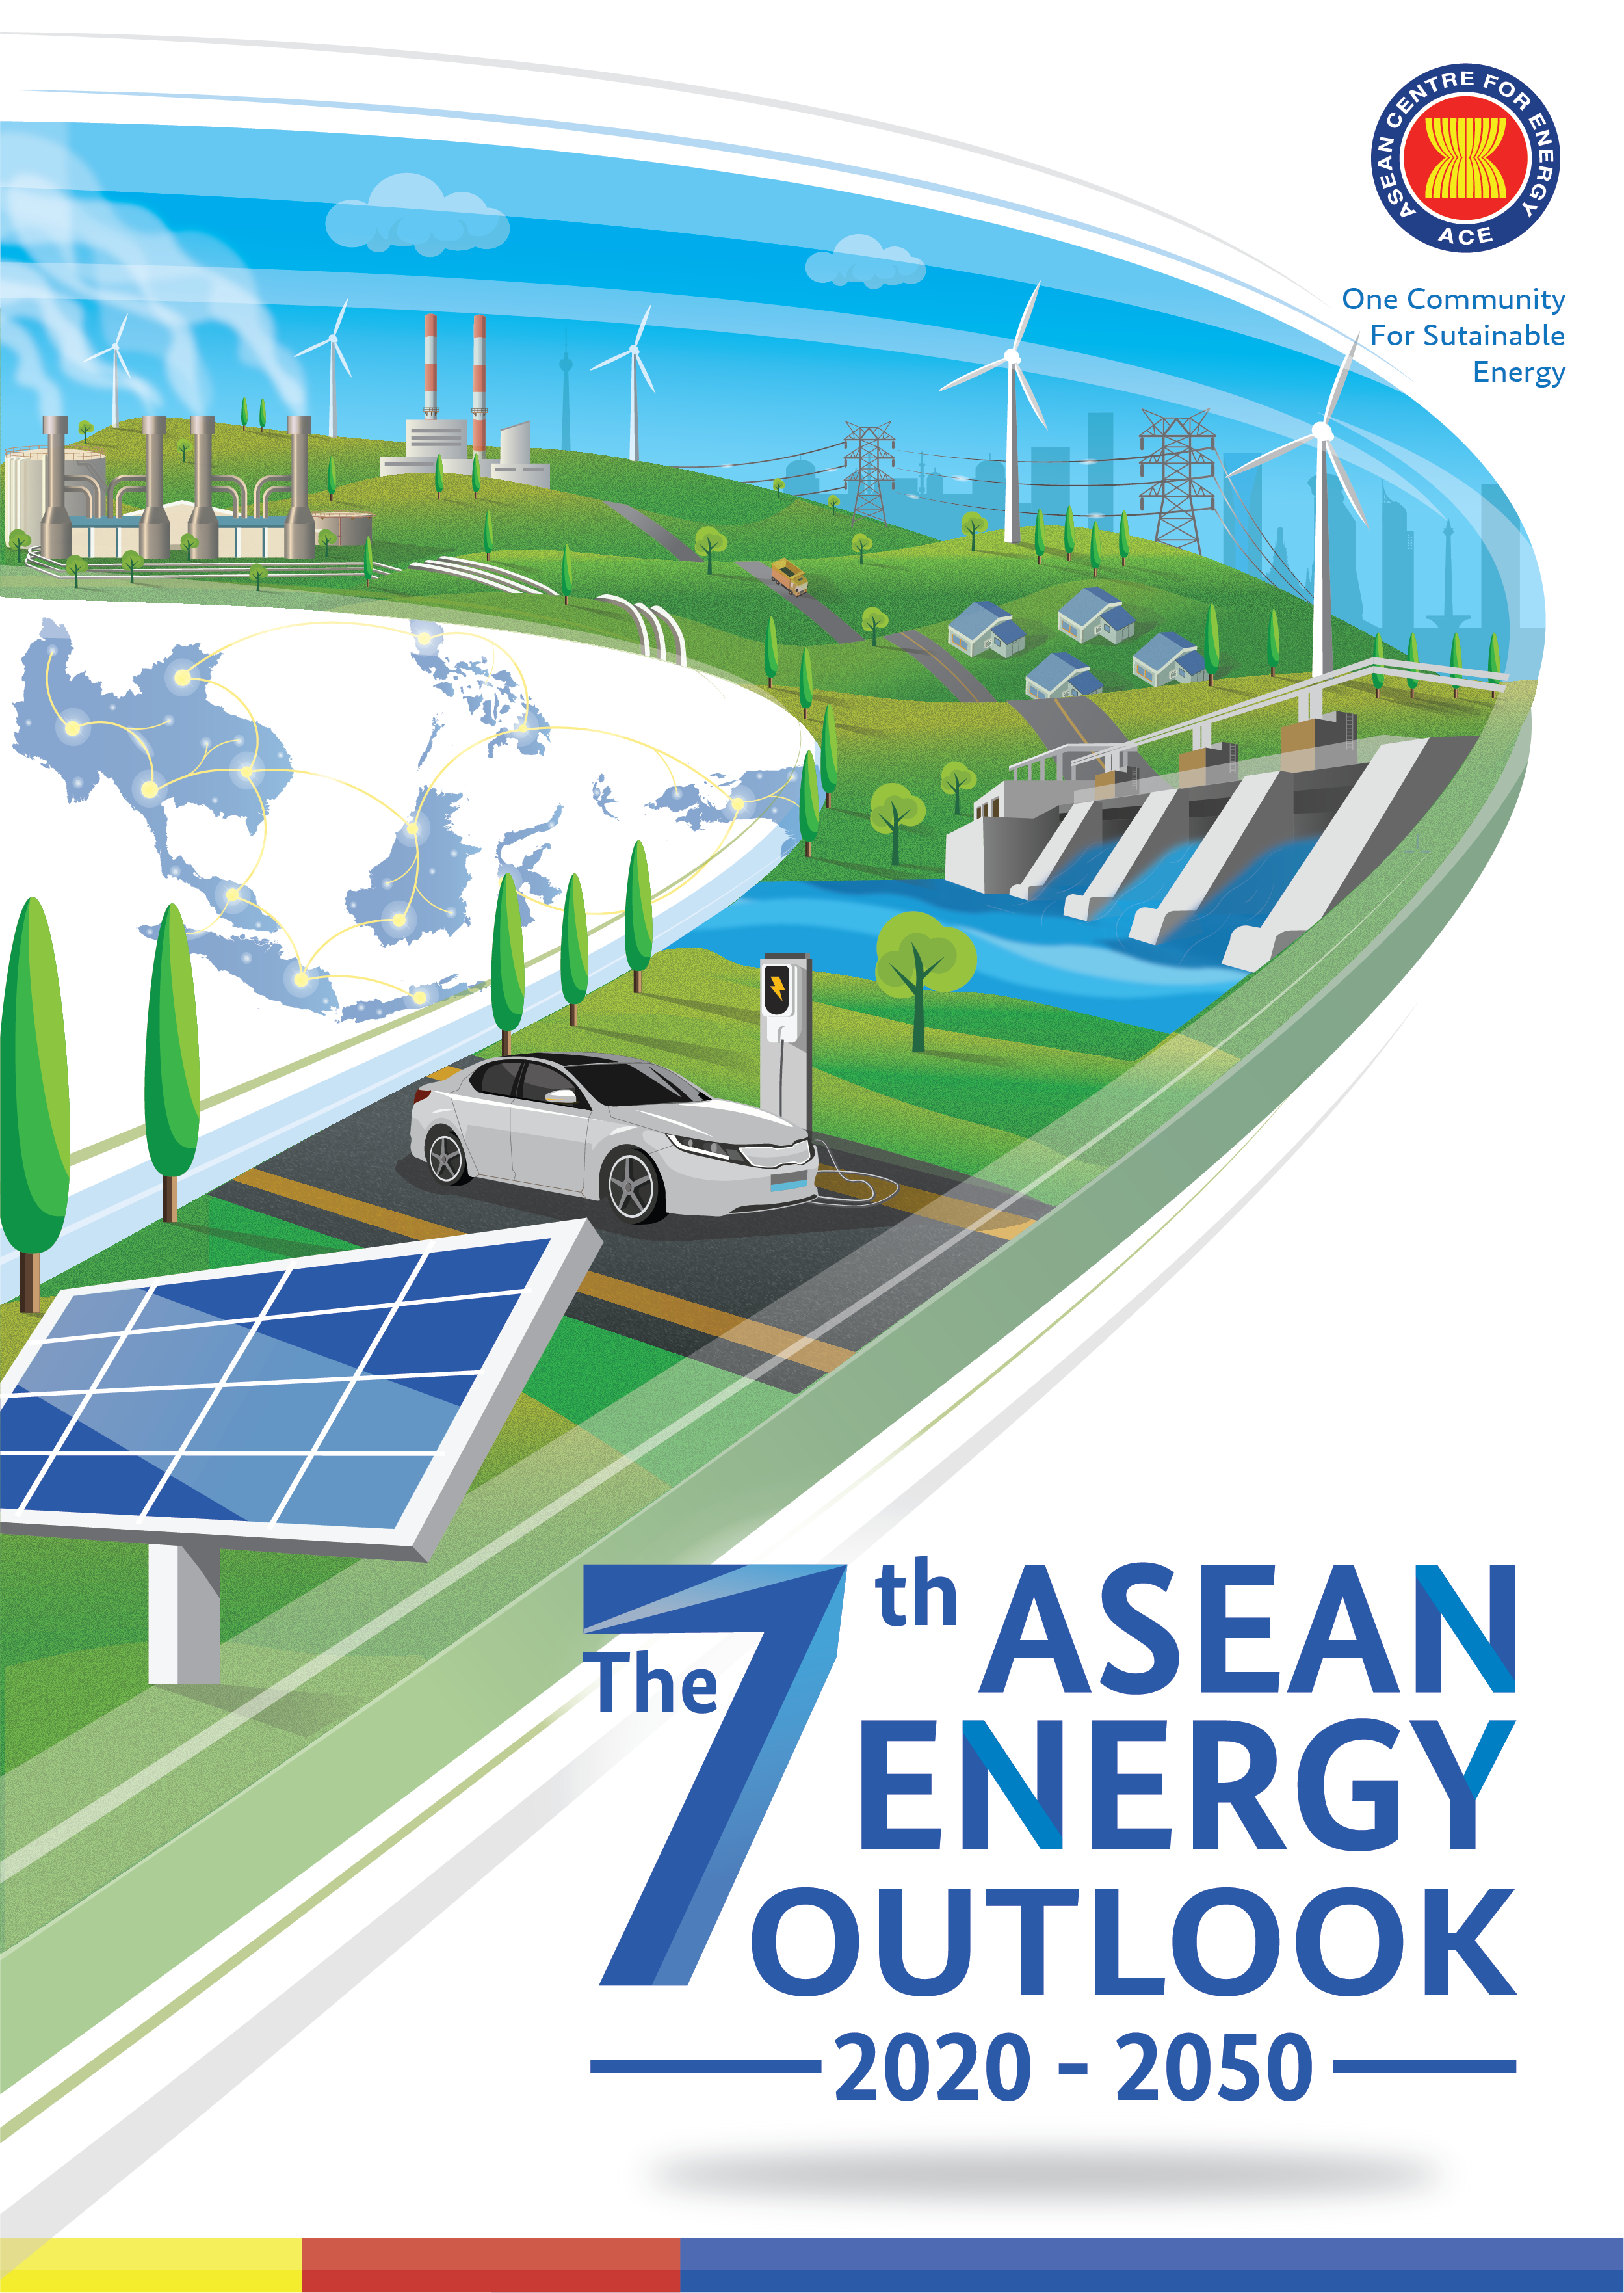 The 7th ASEAN Energy Outlook